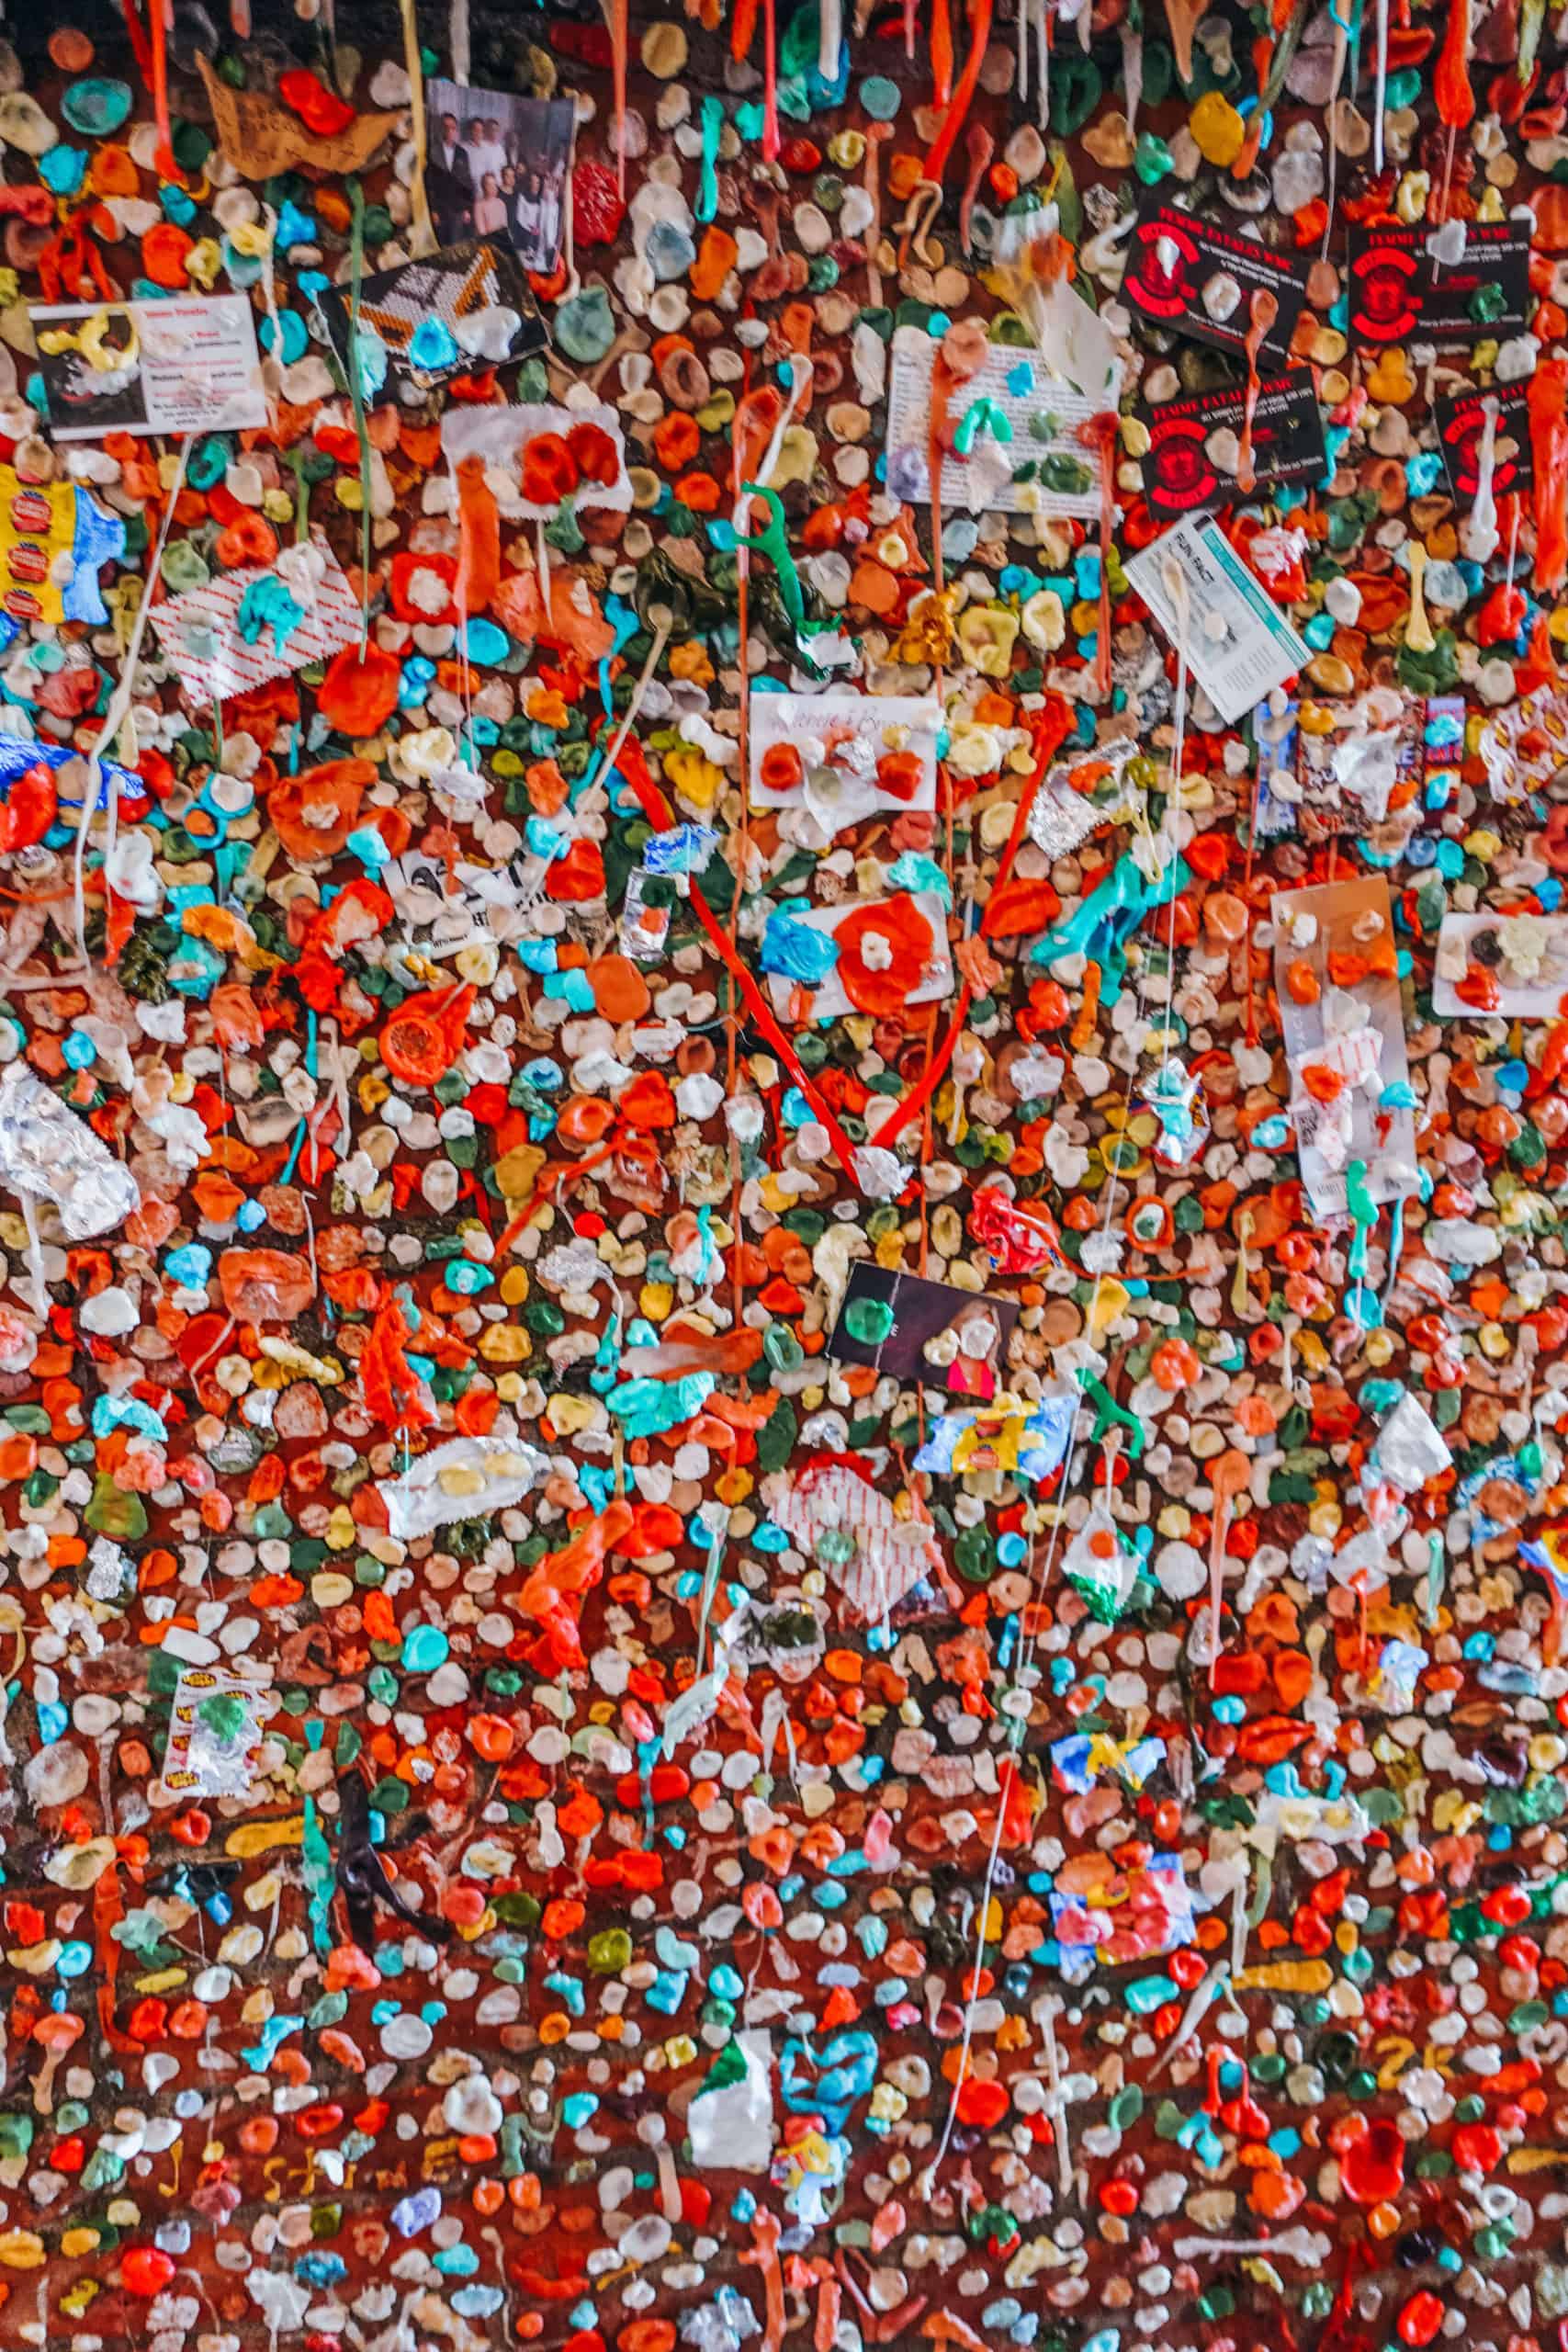 Seattle Gum Wall | The Ultimate First-Timer's Guide to Seattle | The Republic of Rose